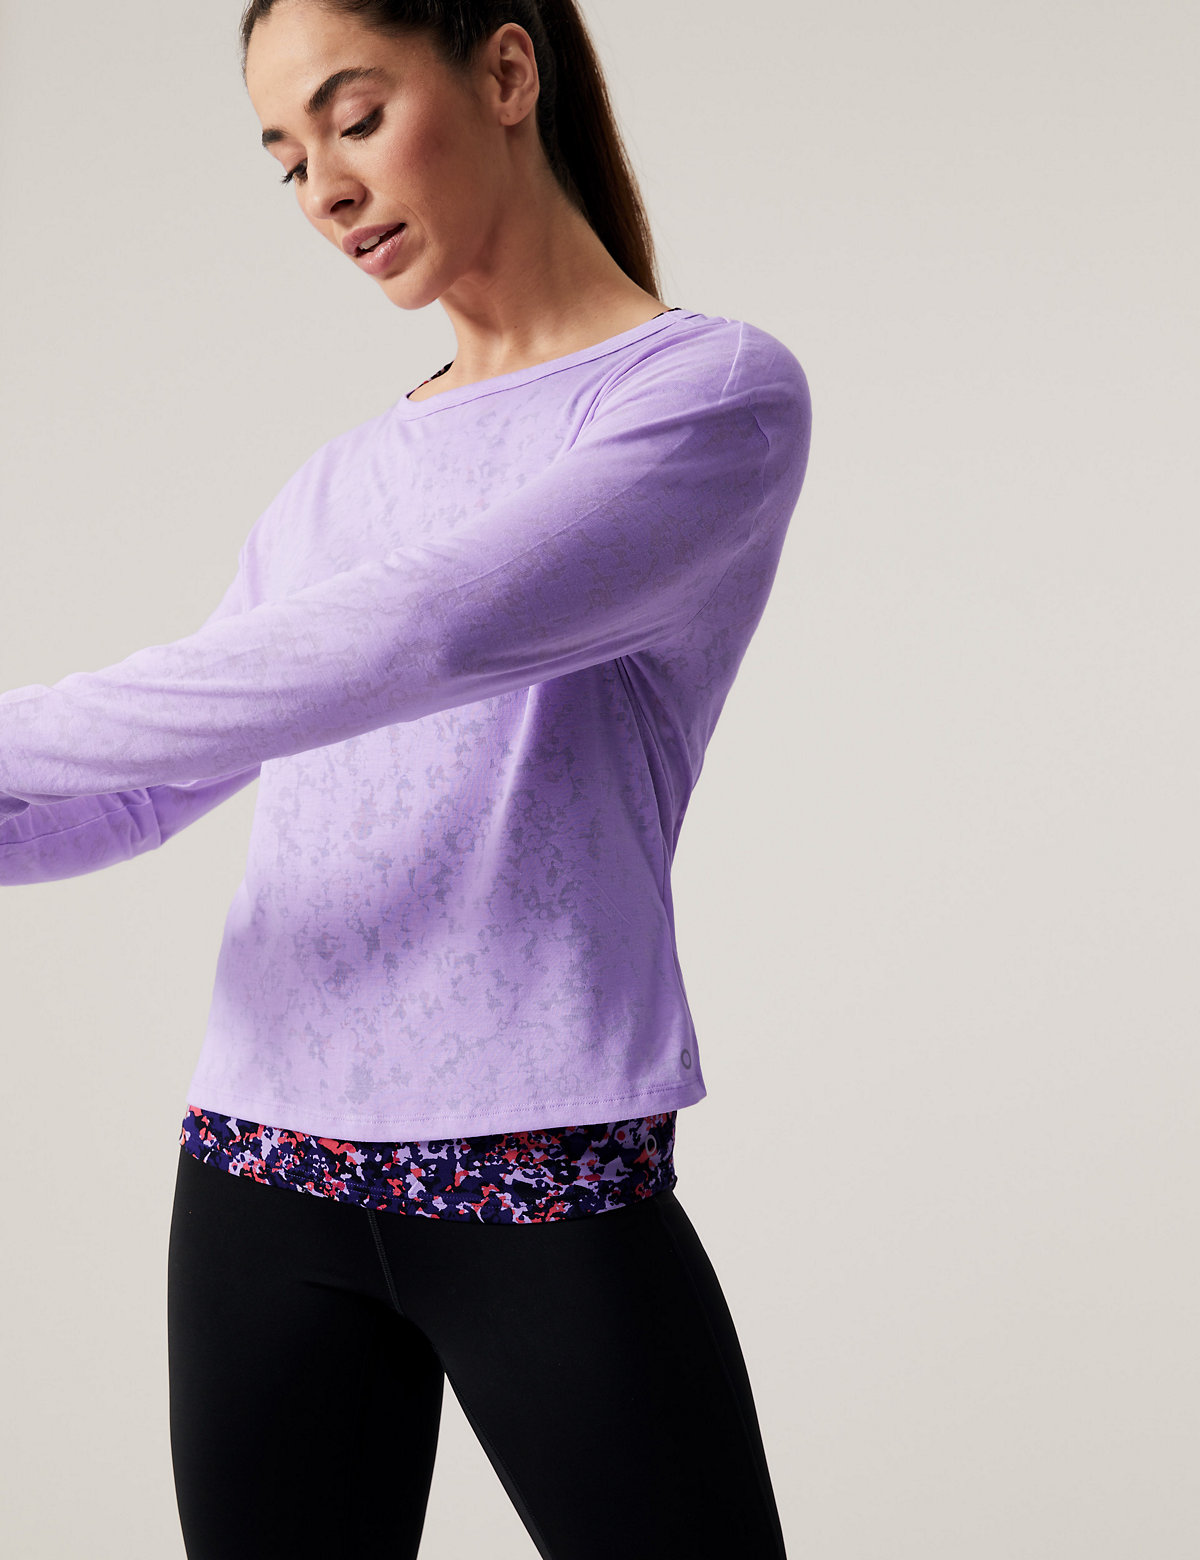 Lightweight Double Layer Long Sleeve Top